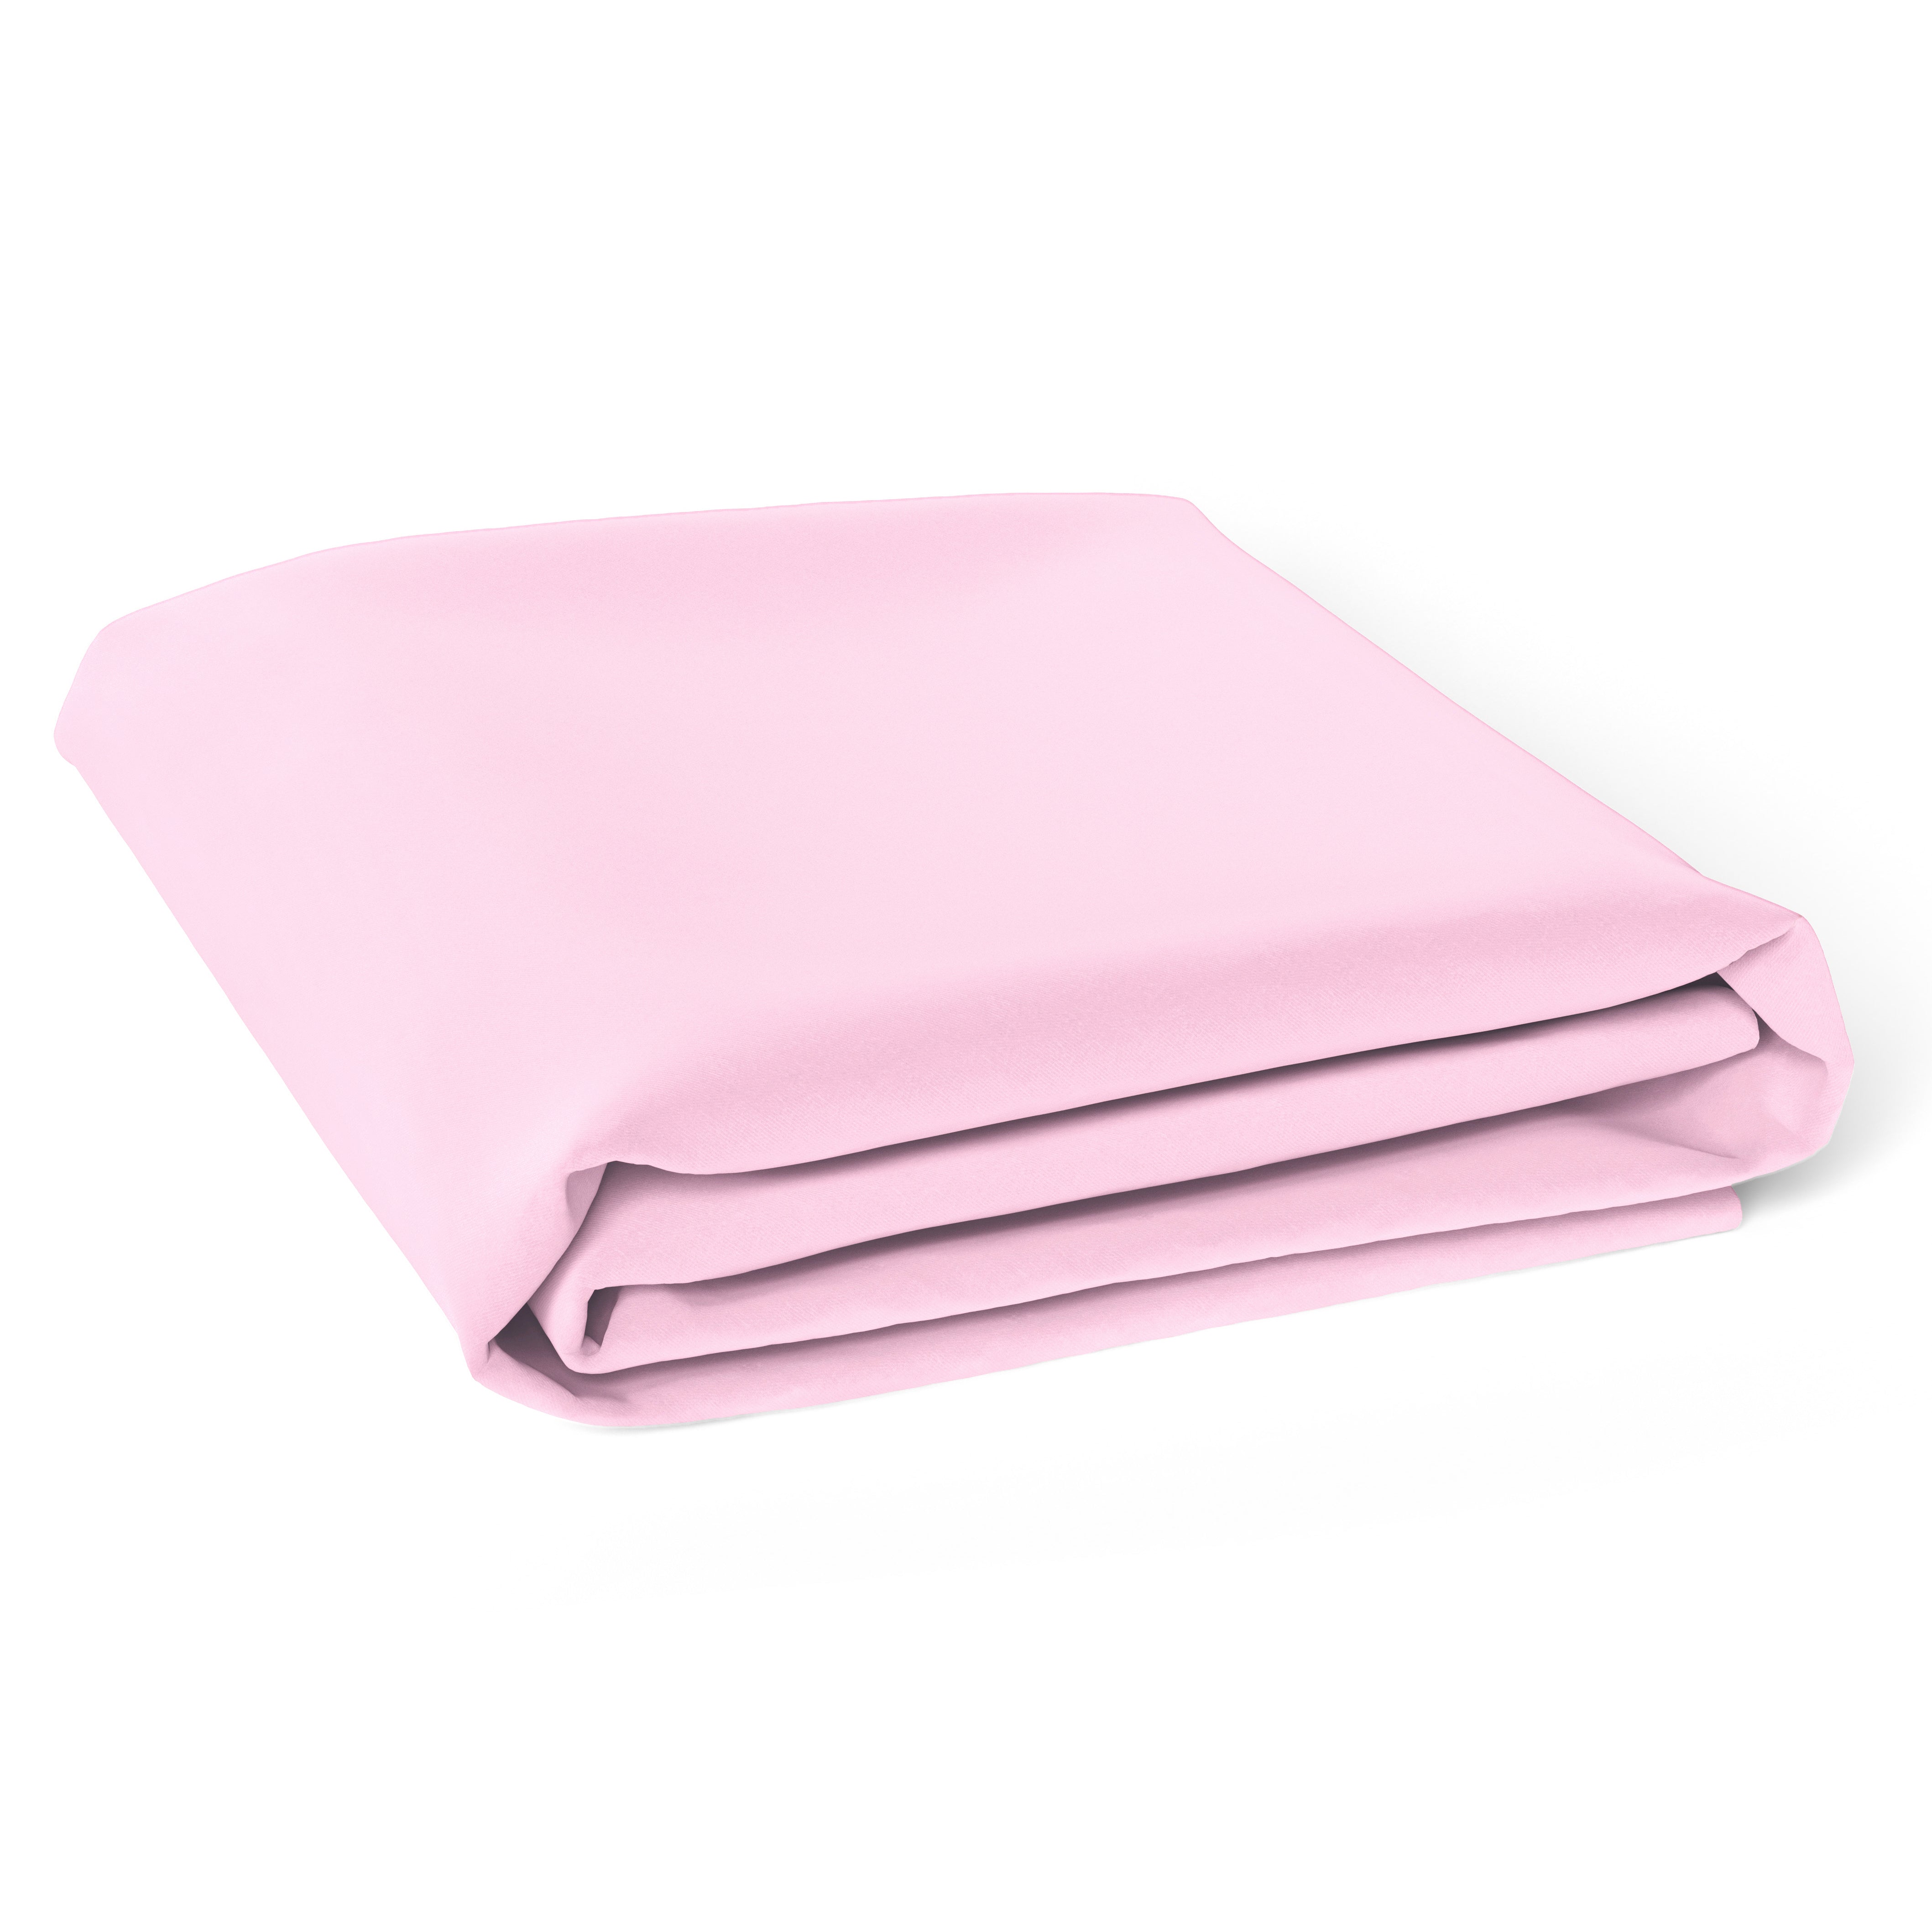 The White Cradle Pure Organic Cotton Elastic Fitted Crib Sheet for Baby Cot 28 x 52 inch - Super Soft, Smooth, Absorbent, Twill Fabric for Infants, Newborns, Babies, Toddlers - Pink